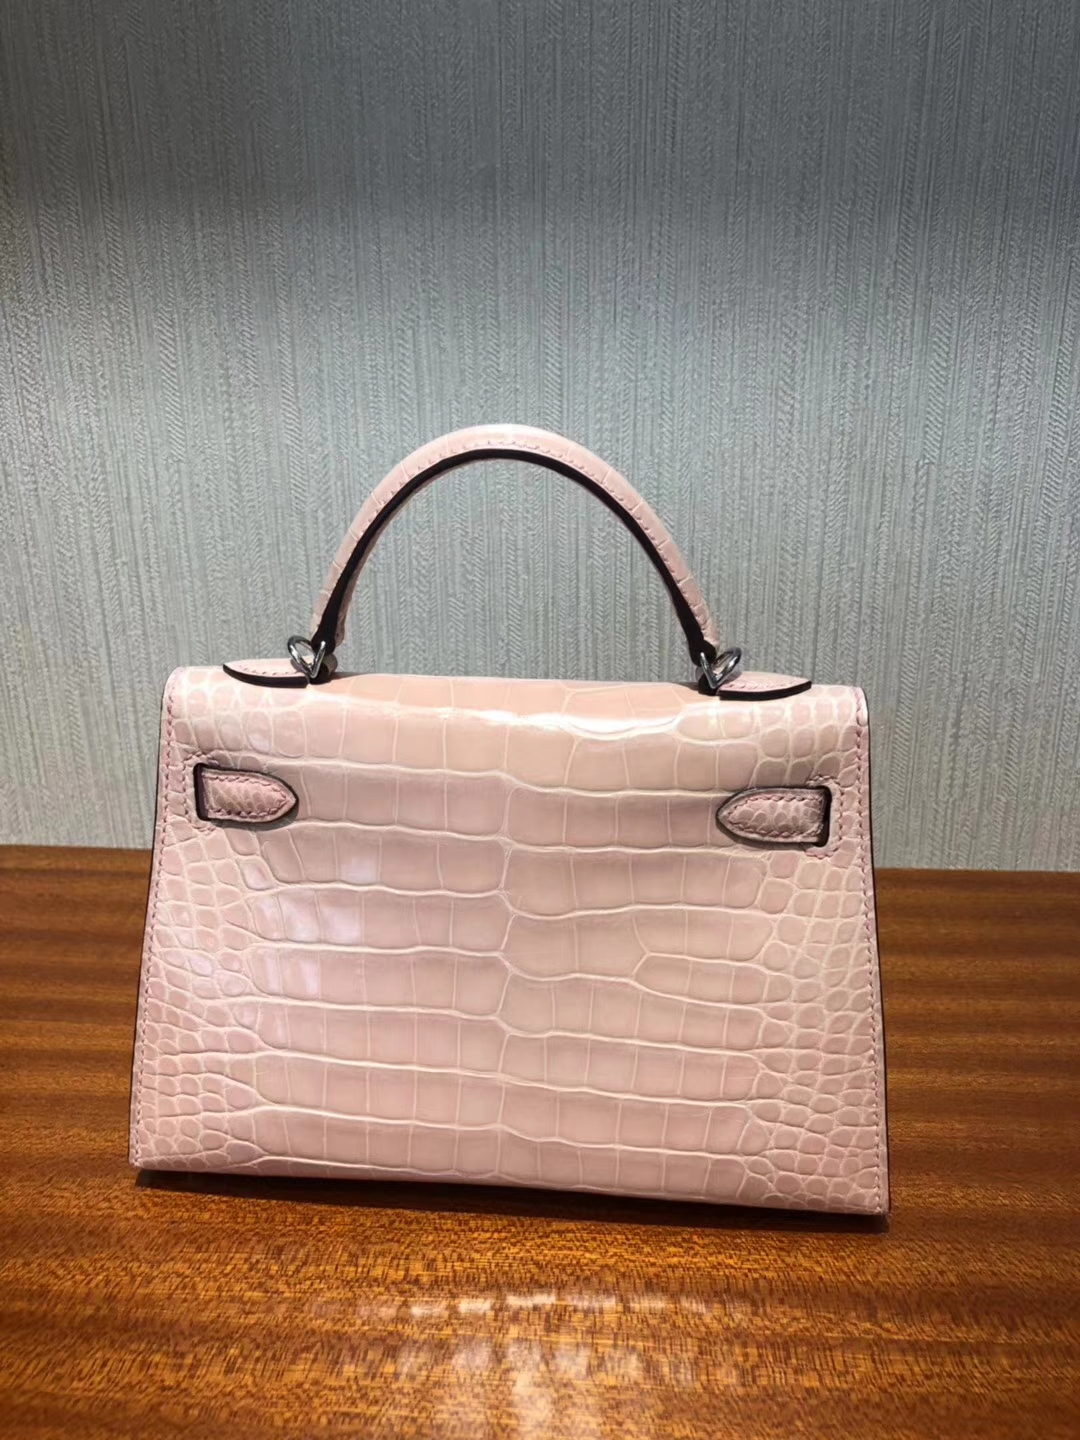 Pretty Hermes Shiny Crocodile Leather Minikelly-2 Evening Bag in Light Pink